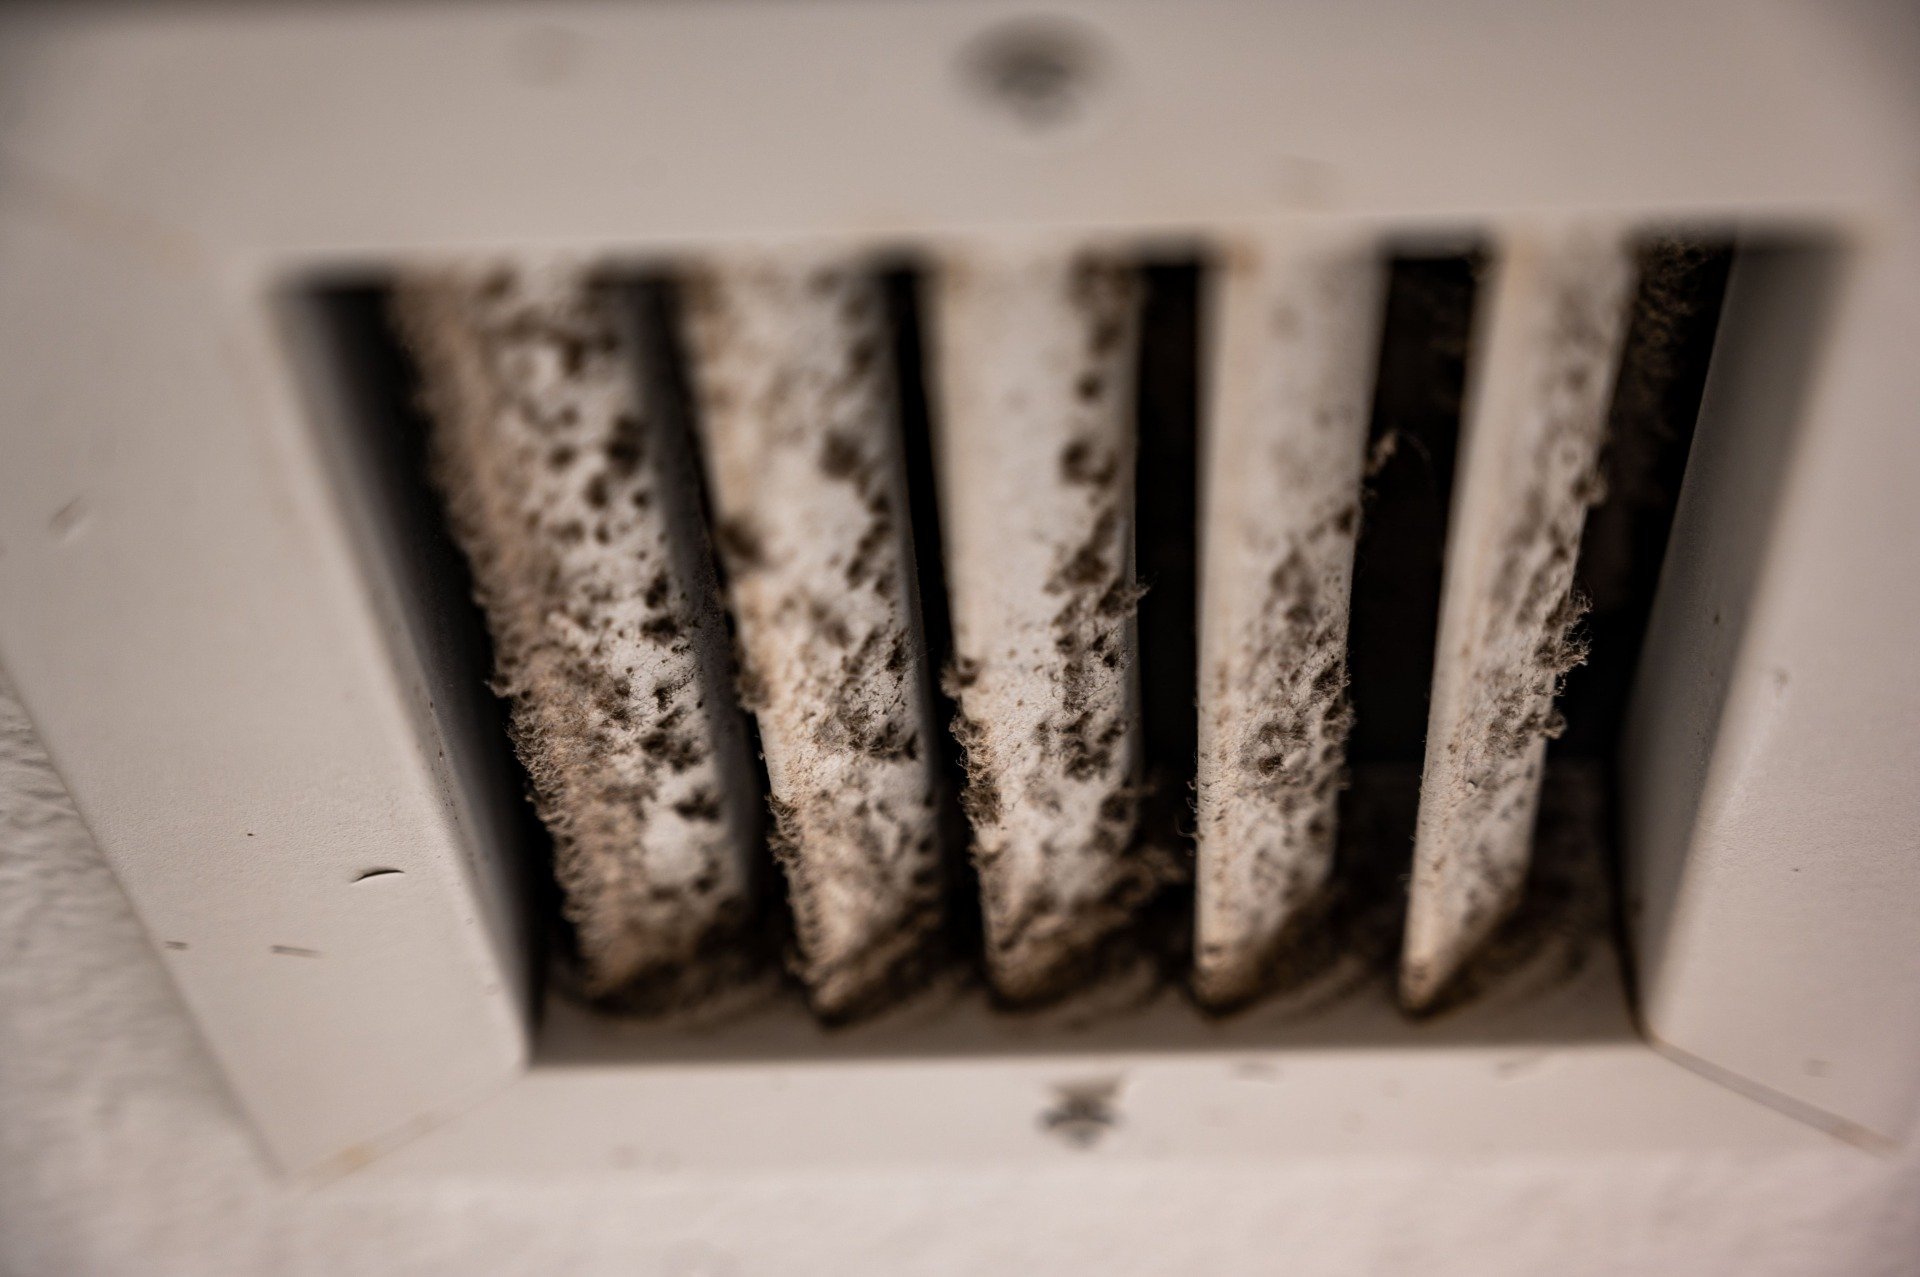 can dirty air ducts make you sick